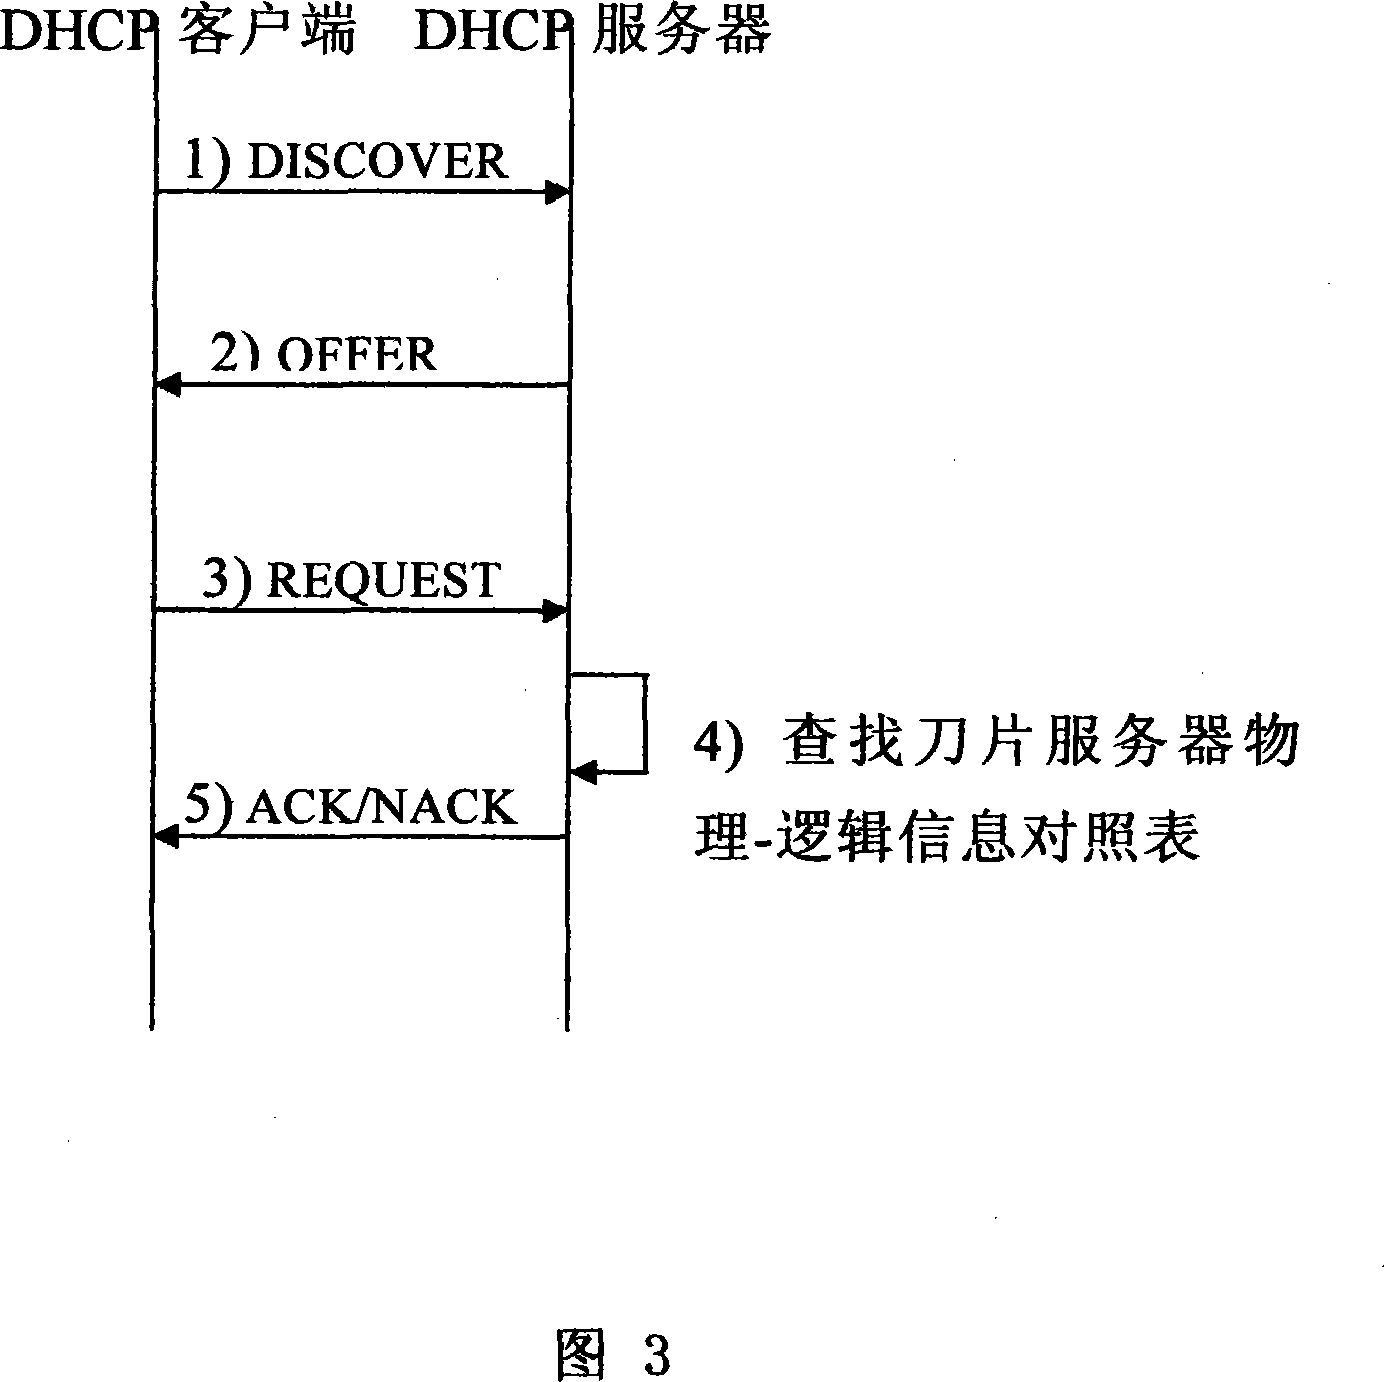 Method for implementing network appliance to automatically collocation install